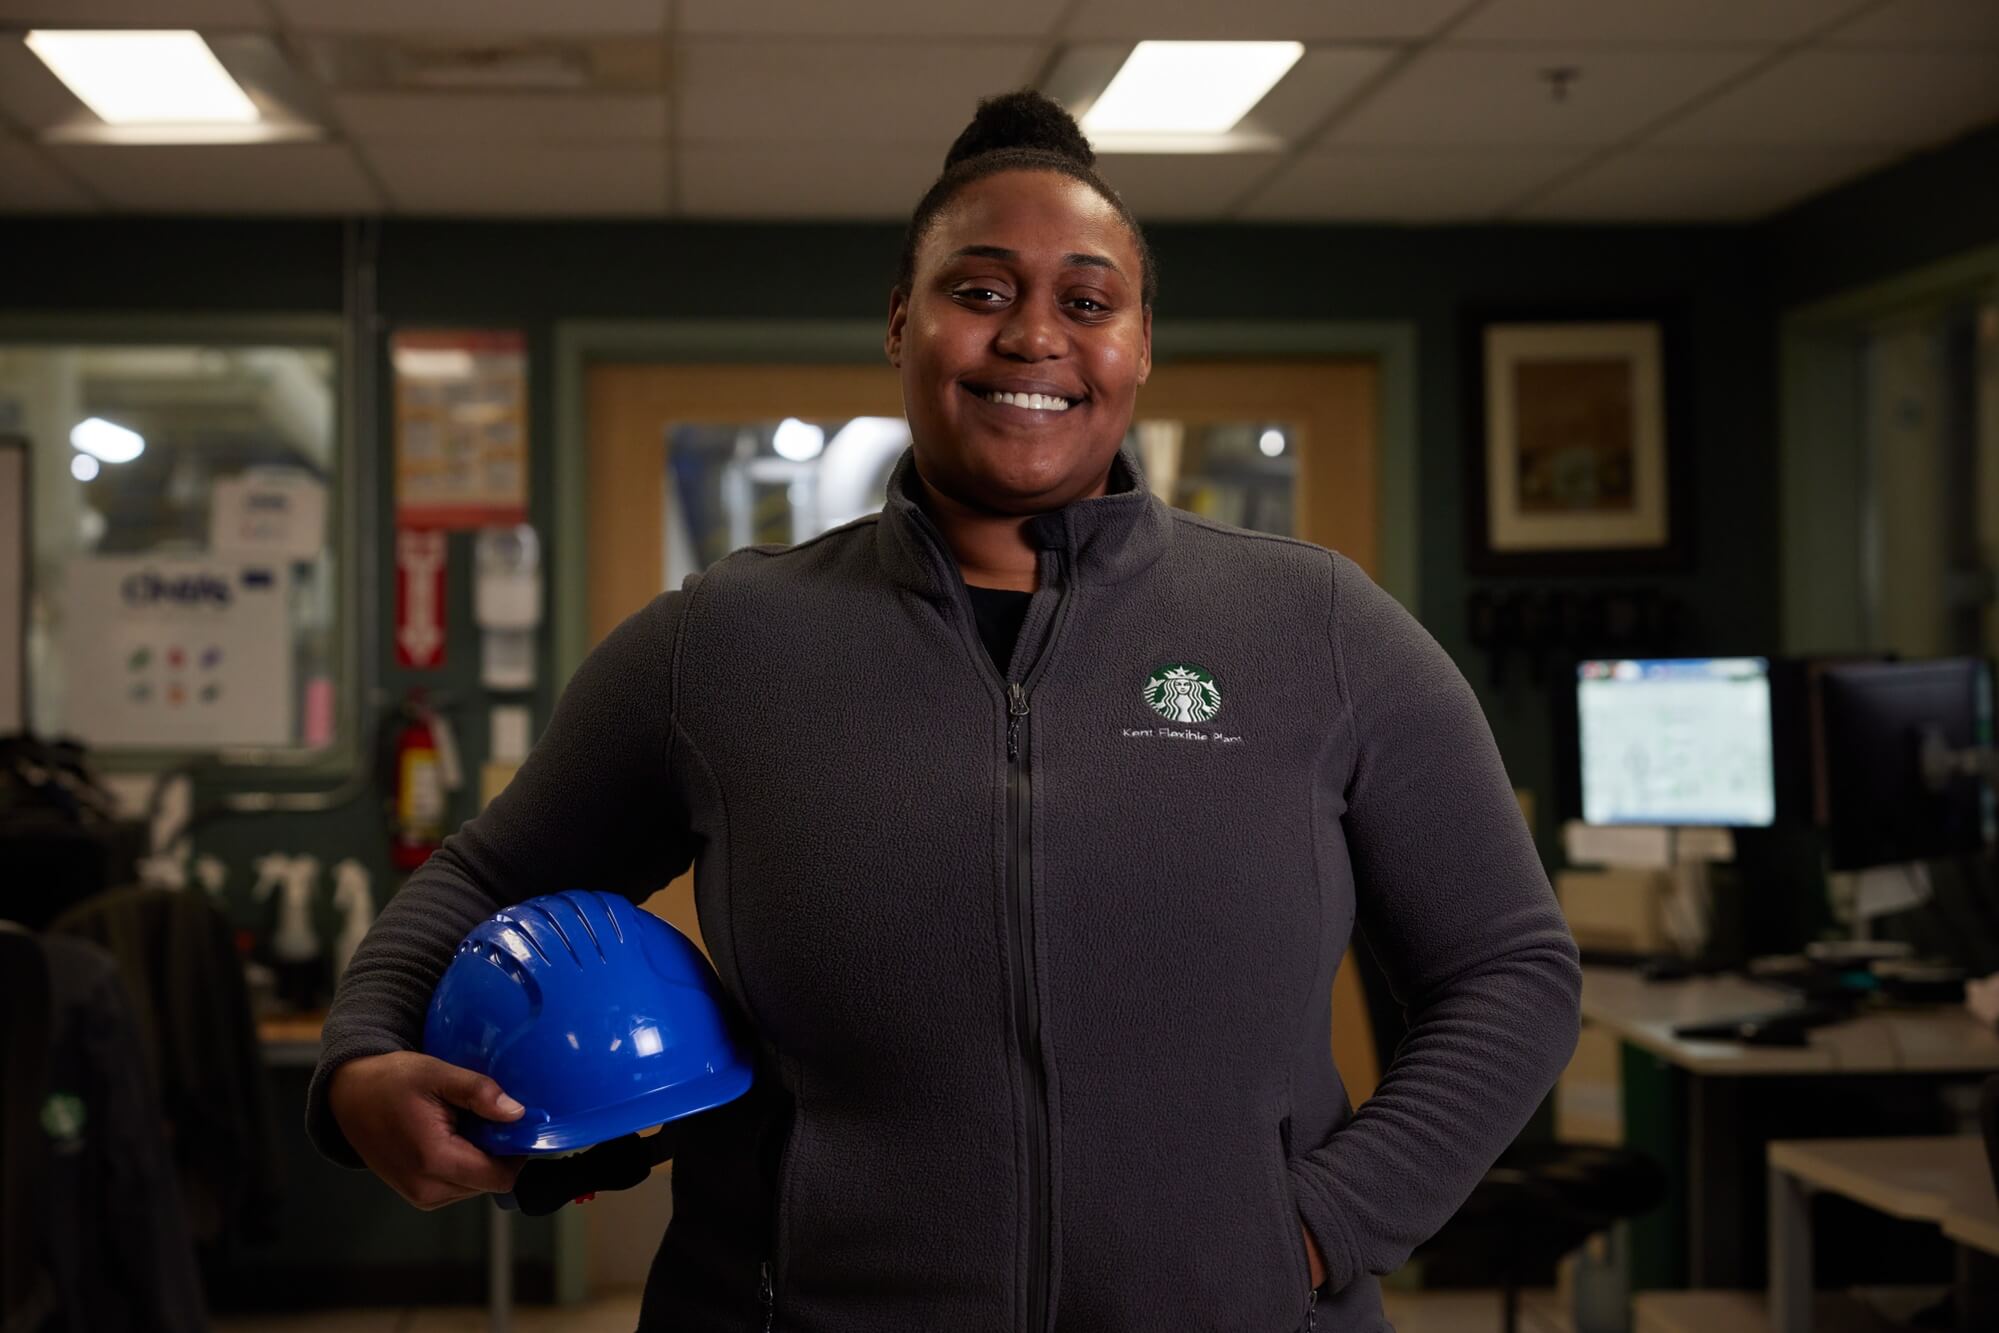 A person wearing a Starbucks branded zip-up jacket holds a blue hard hat and smiles .